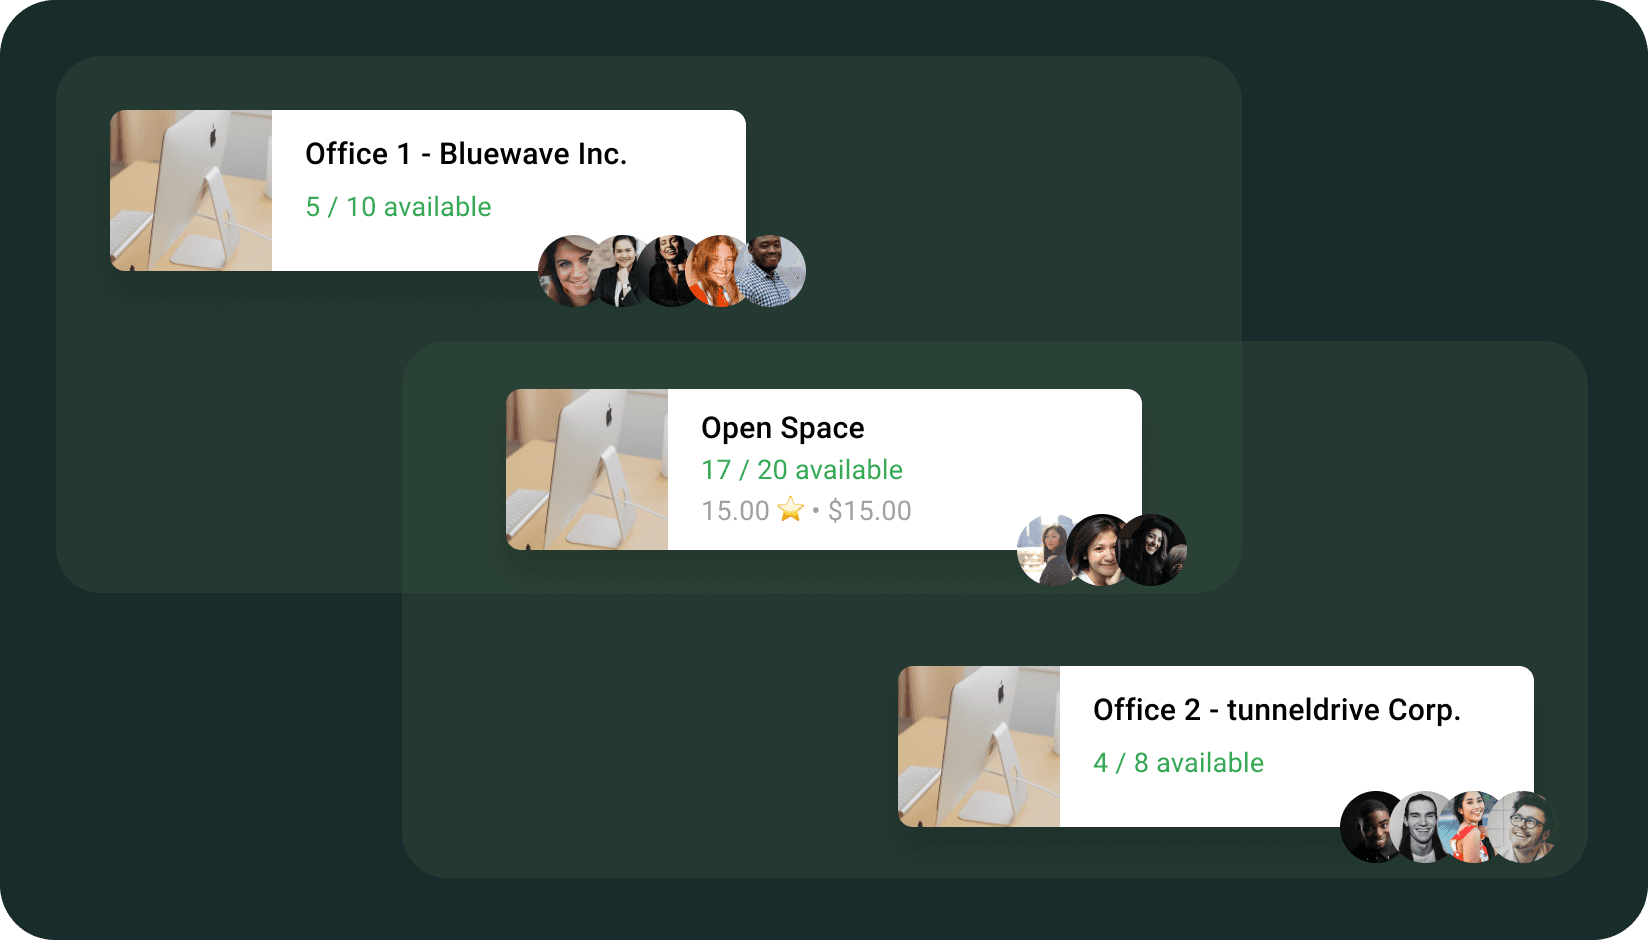 Availability of desks at a coworking space by office and in the open space on Spacebring coworking space software 